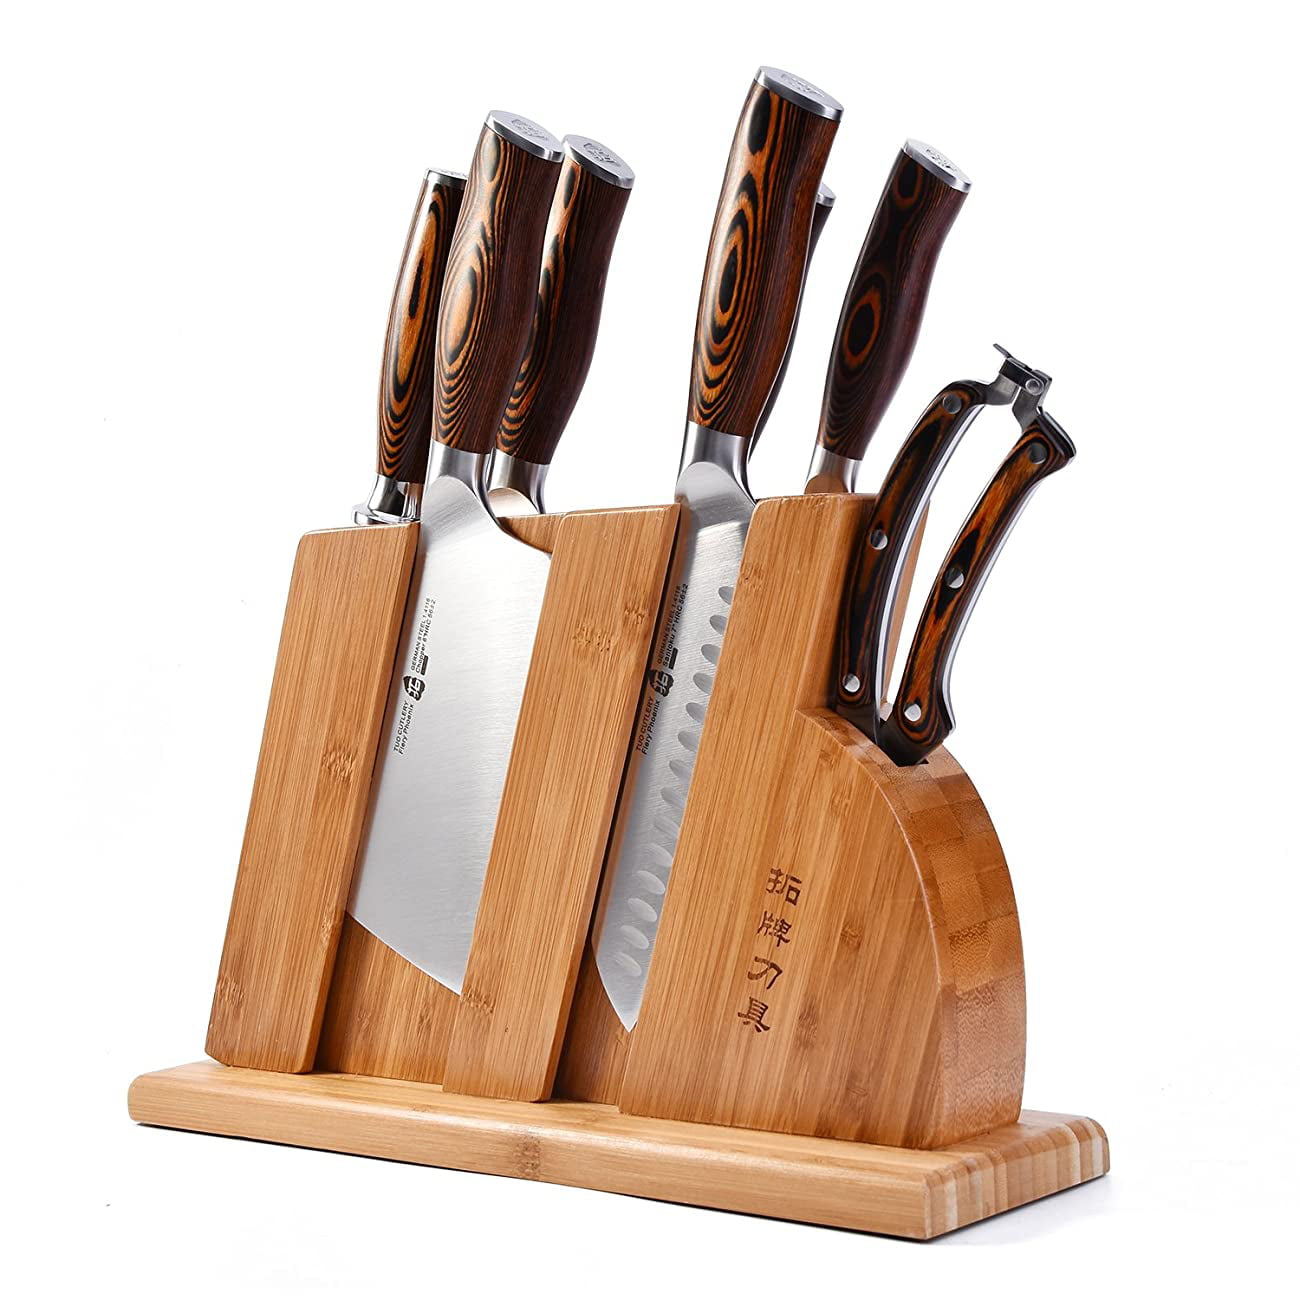 The Best Knife Sets for Home Cooks – PureWow